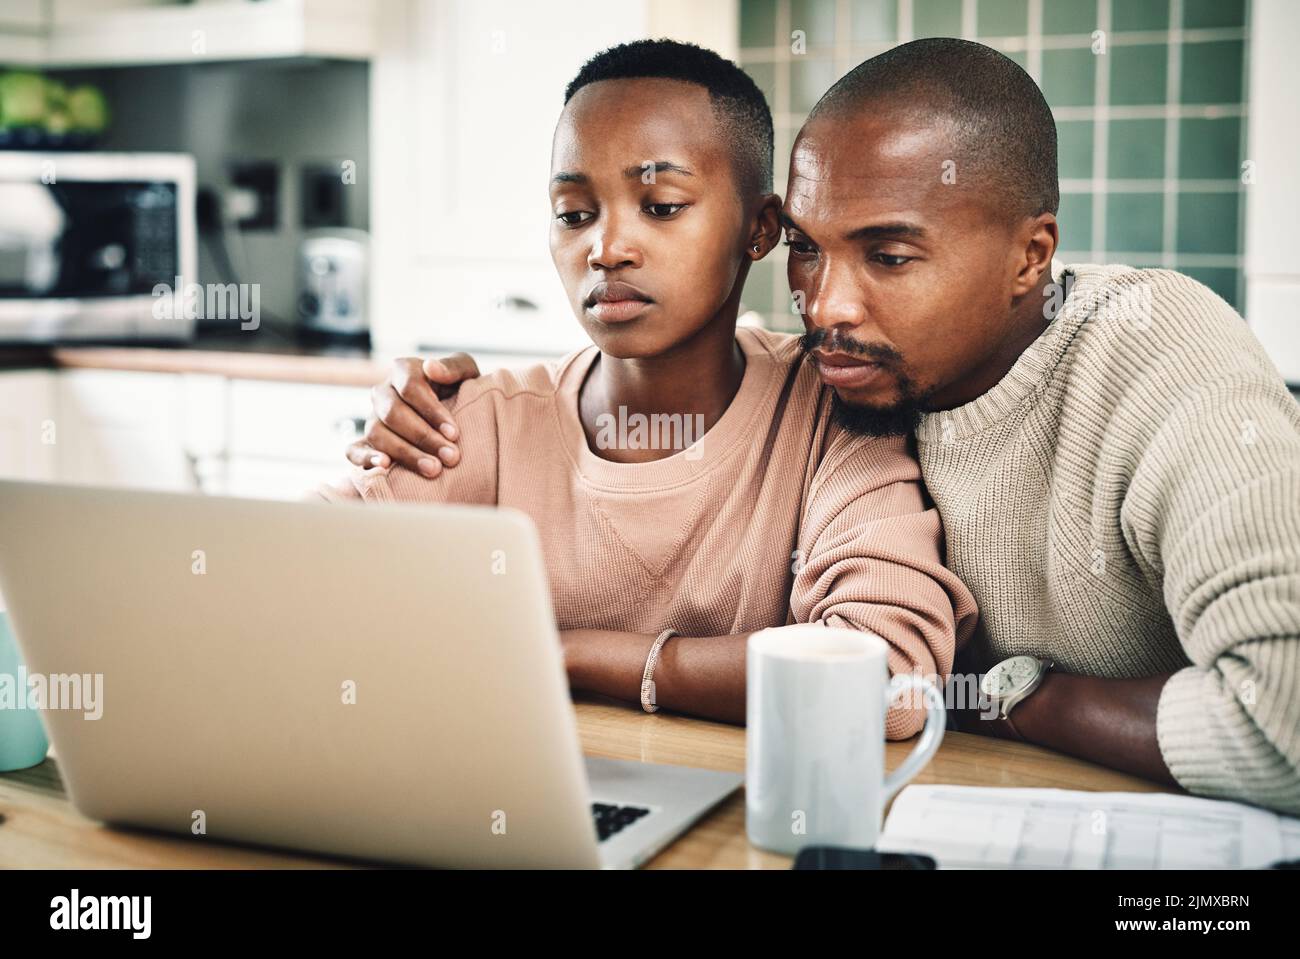 Were locked in and intrigued by the movie. a young couple using a laptop while relaxing together at home. Stock Photo